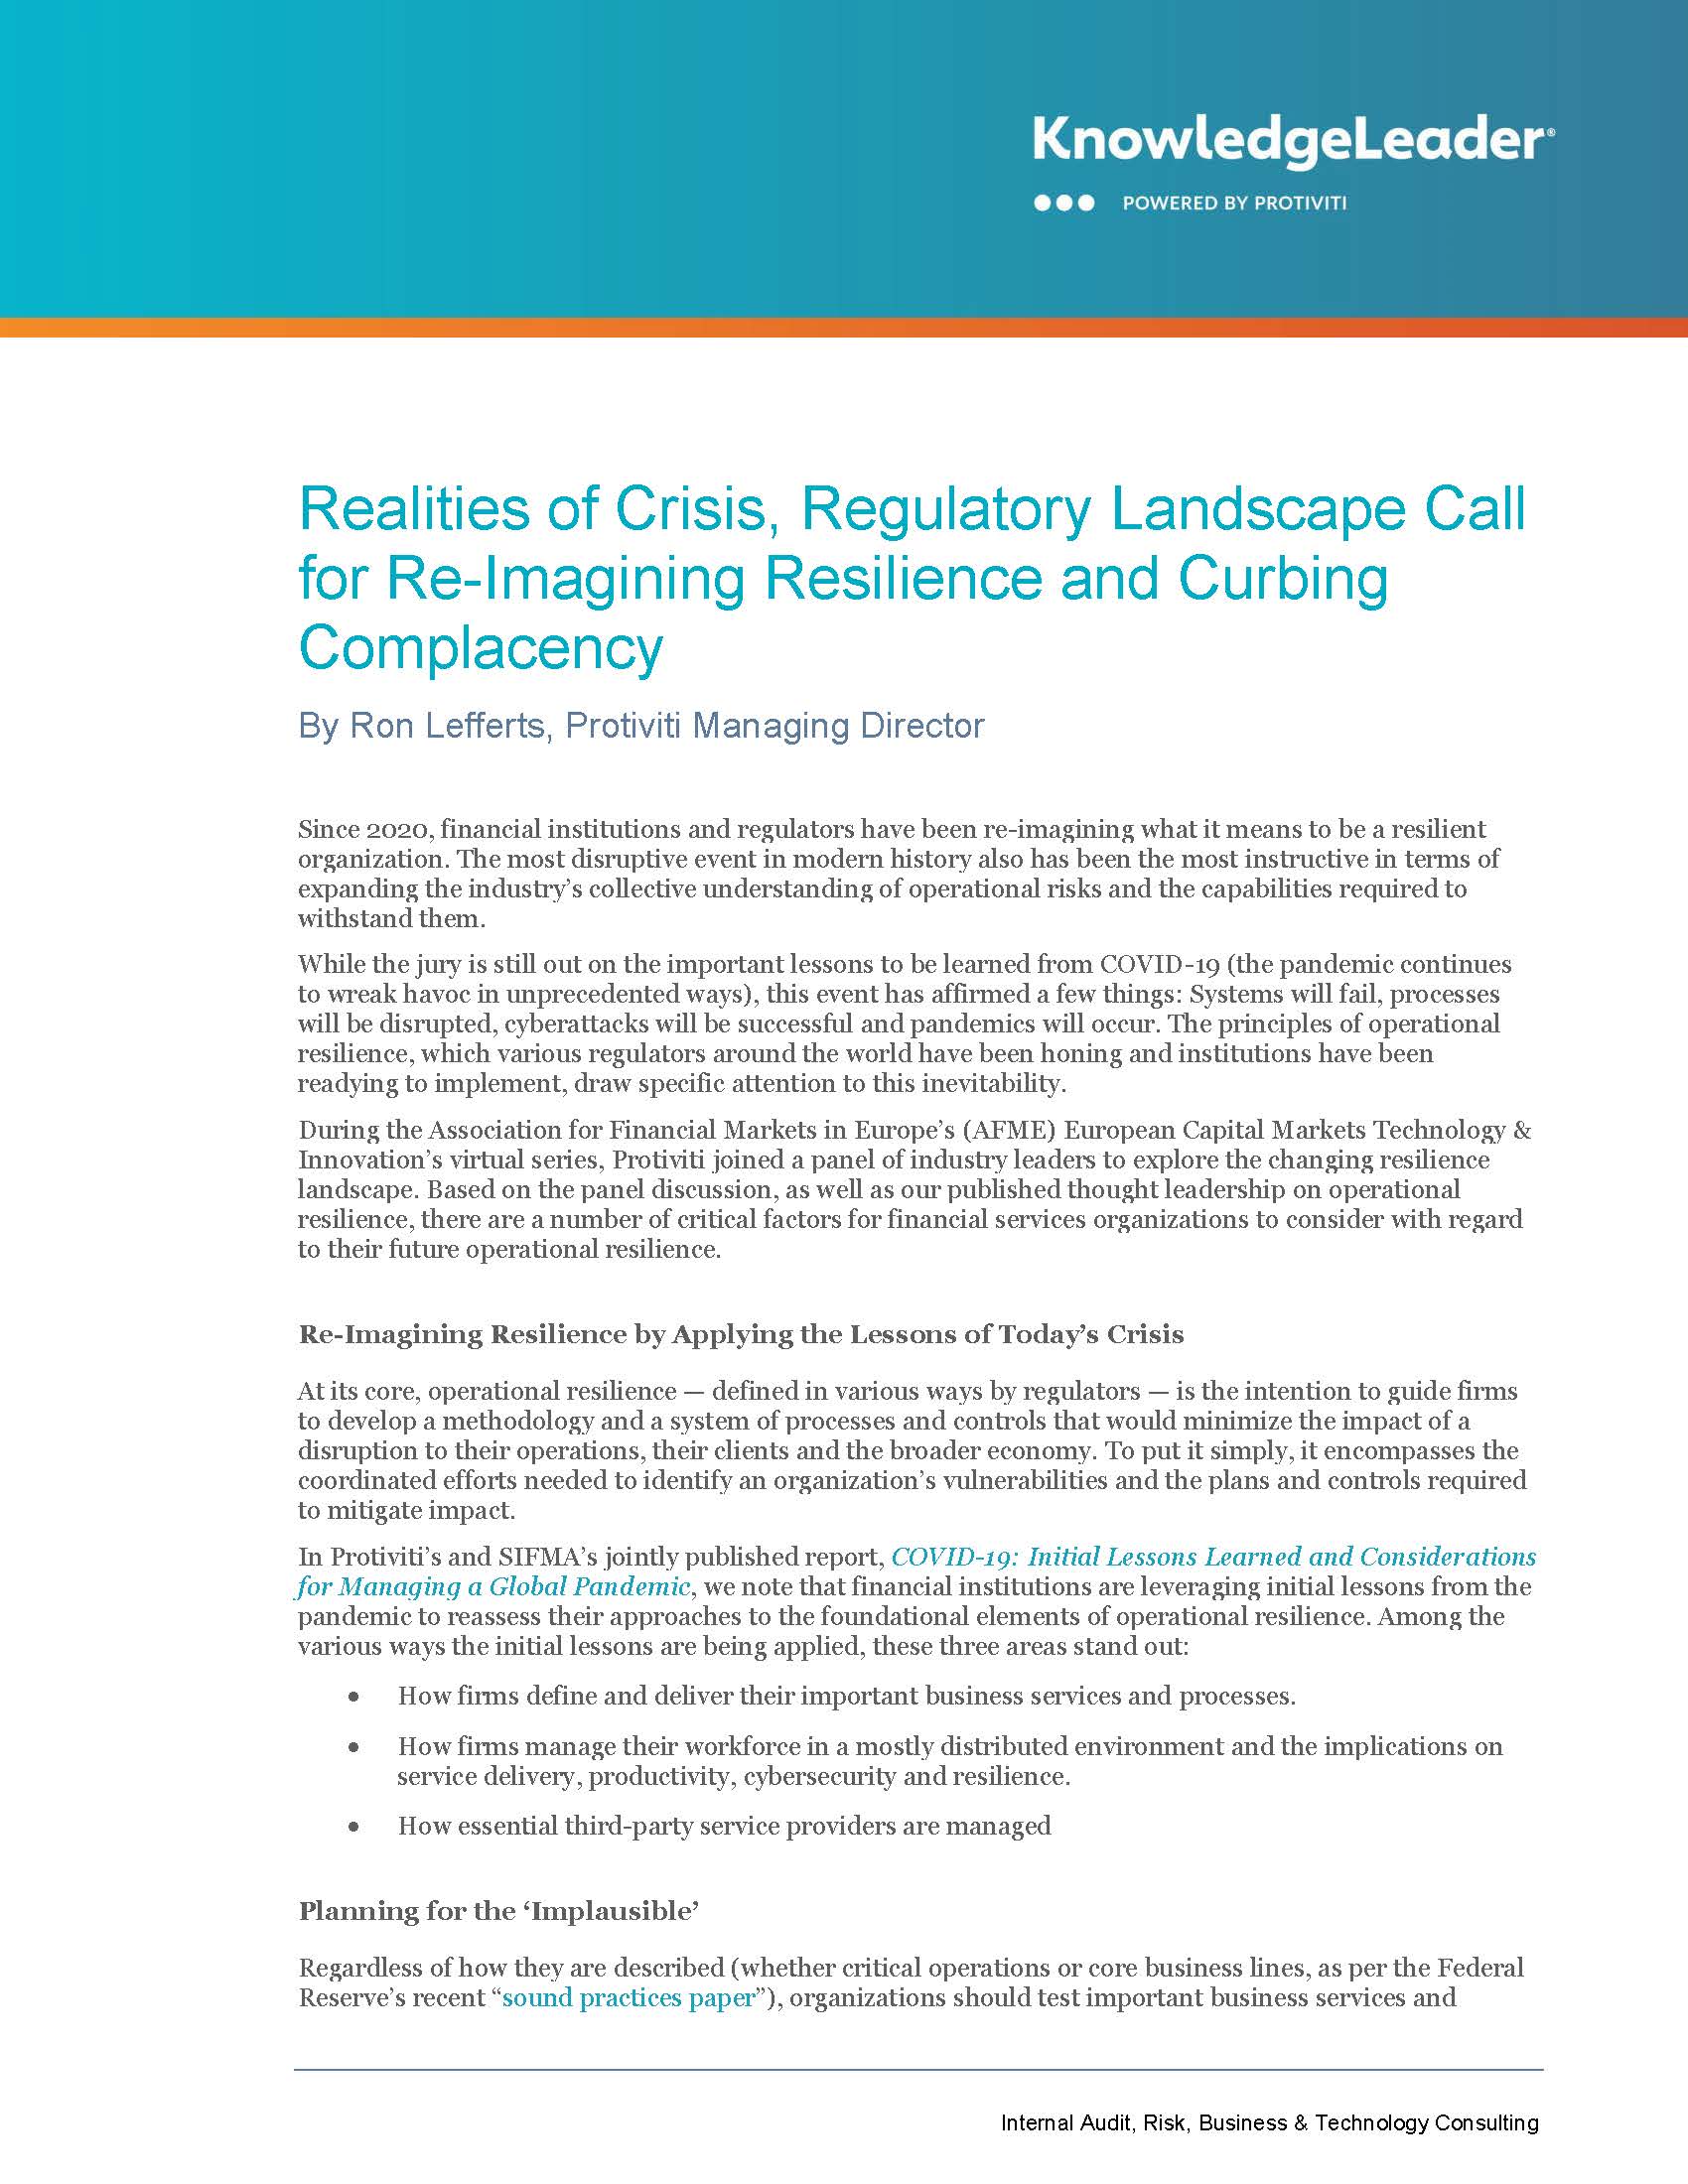 Screenshot of the first page of Realities of Crisis, Regulatory Landscape Call for Re-imagining Resilience and Curbing Complacency